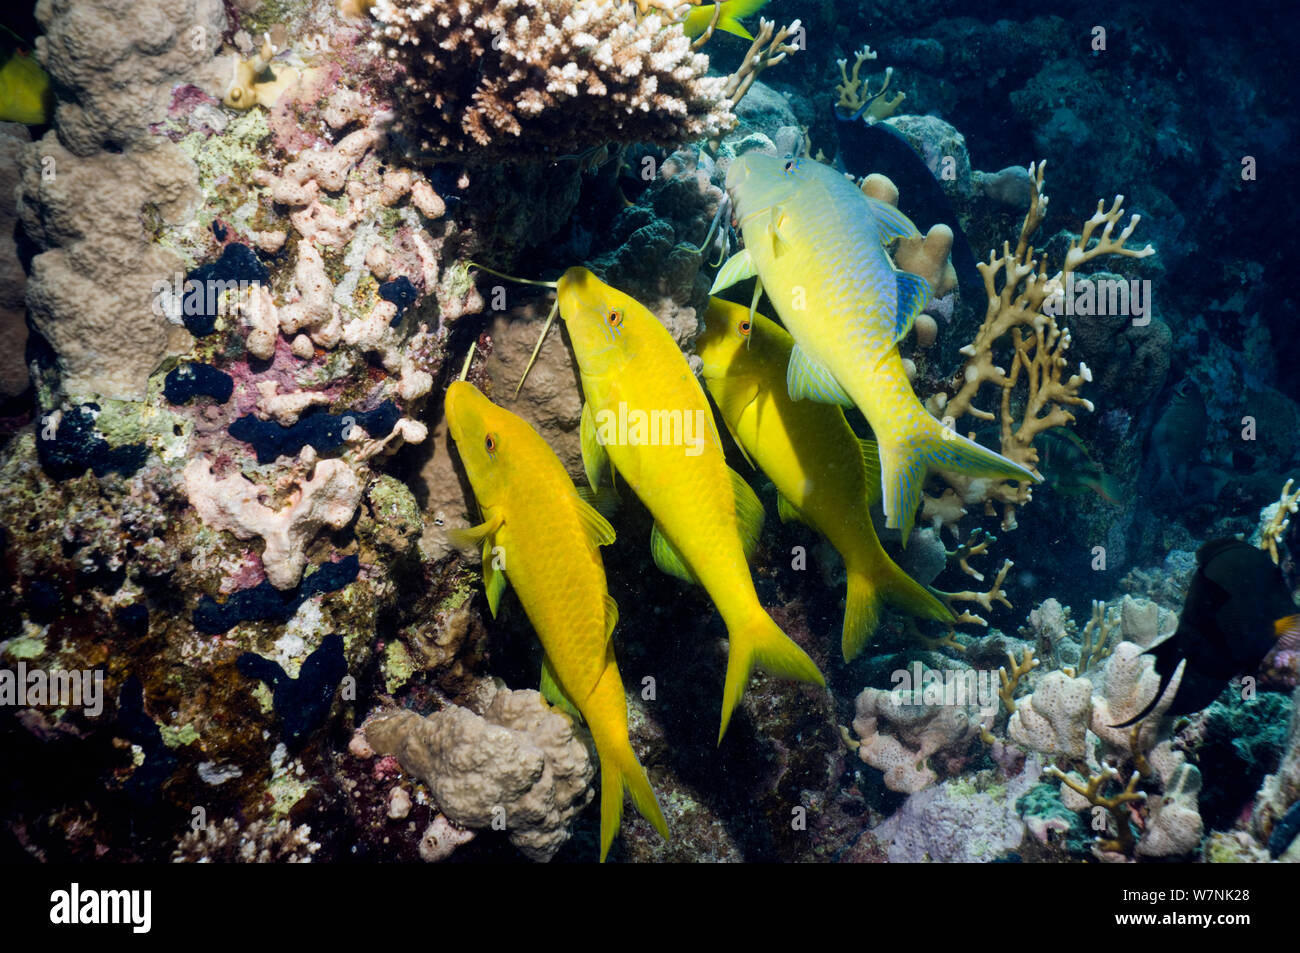 Yellowsaddle goatfish (Parupeneus cyclostomus) gang hunting over coral reef. Egypt, Red Sea. Stock Photo